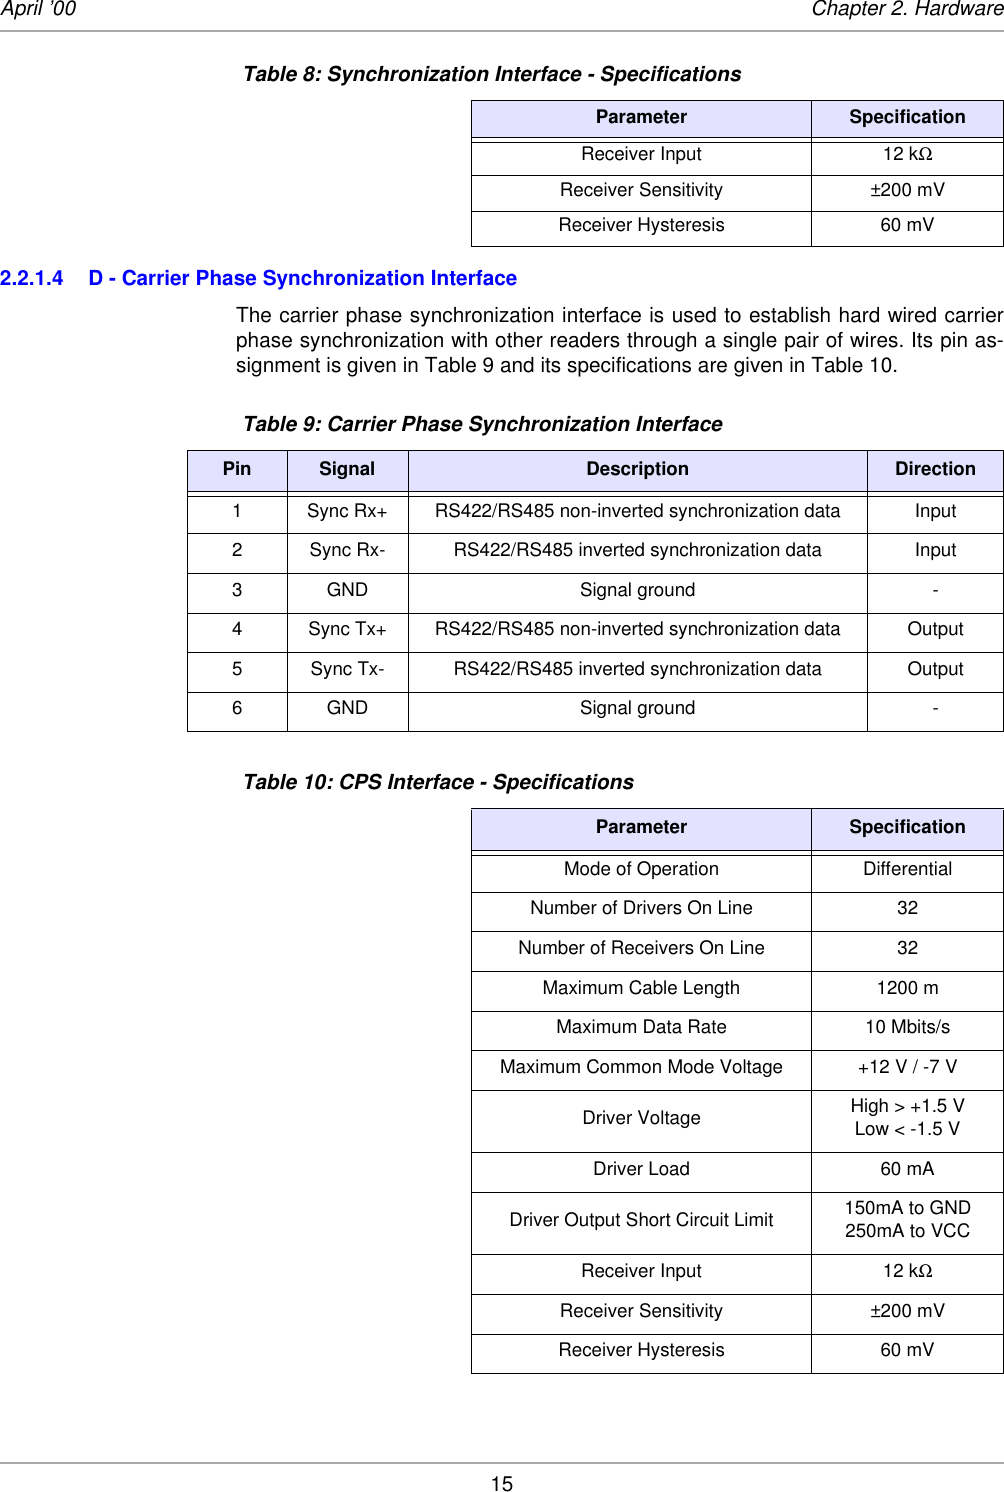 15April ’00 Chapter 2. Hardware2.2.1.4 D - Carrier Phase Synchronization Interface The carrier phase synchronization interface is used to establish hard wired carrierphase synchronization with other readers through a single pair of wires. Its pin as-signment is given in Table 9 and its specifications are given in Table 10. Receiver Input 12 kΩReceiver Sensitivity ±200 mVReceiver Hysteresis 60 mV Table 9: Carrier Phase Synchronization InterfacePin Signal Description Direction1 Sync Rx+ RS422/RS485 non-inverted synchronization data  Input2 Sync Rx- RS422/RS485 inverted synchronization data  Input3 GND Signal ground -4 Sync Tx+ RS422/RS485 non-inverted synchronization data Output5 Sync Tx- RS422/RS485 inverted synchronization data  Output6 GND Signal ground - Table 10: CPS Interface - SpecificationsParameter SpecificationMode of Operation DifferentialNumber of Drivers On Line 32 Number of Receivers On Line 32 Maximum Cable Length 1200 mMaximum Data Rate 10 Mbits/sMaximum Common Mode Voltage +12 V / -7 VDriver Voltage High &gt; +1.5 VLow &lt; -1.5 VDriver Load 60 mADriver Output Short Circuit Limit 150mA to GND250mA to VCCReceiver Input 12 kΩReceiver Sensitivity ±200 mVReceiver Hysteresis 60 mV Table 8: Synchronization Interface - SpecificationsParameter Specification